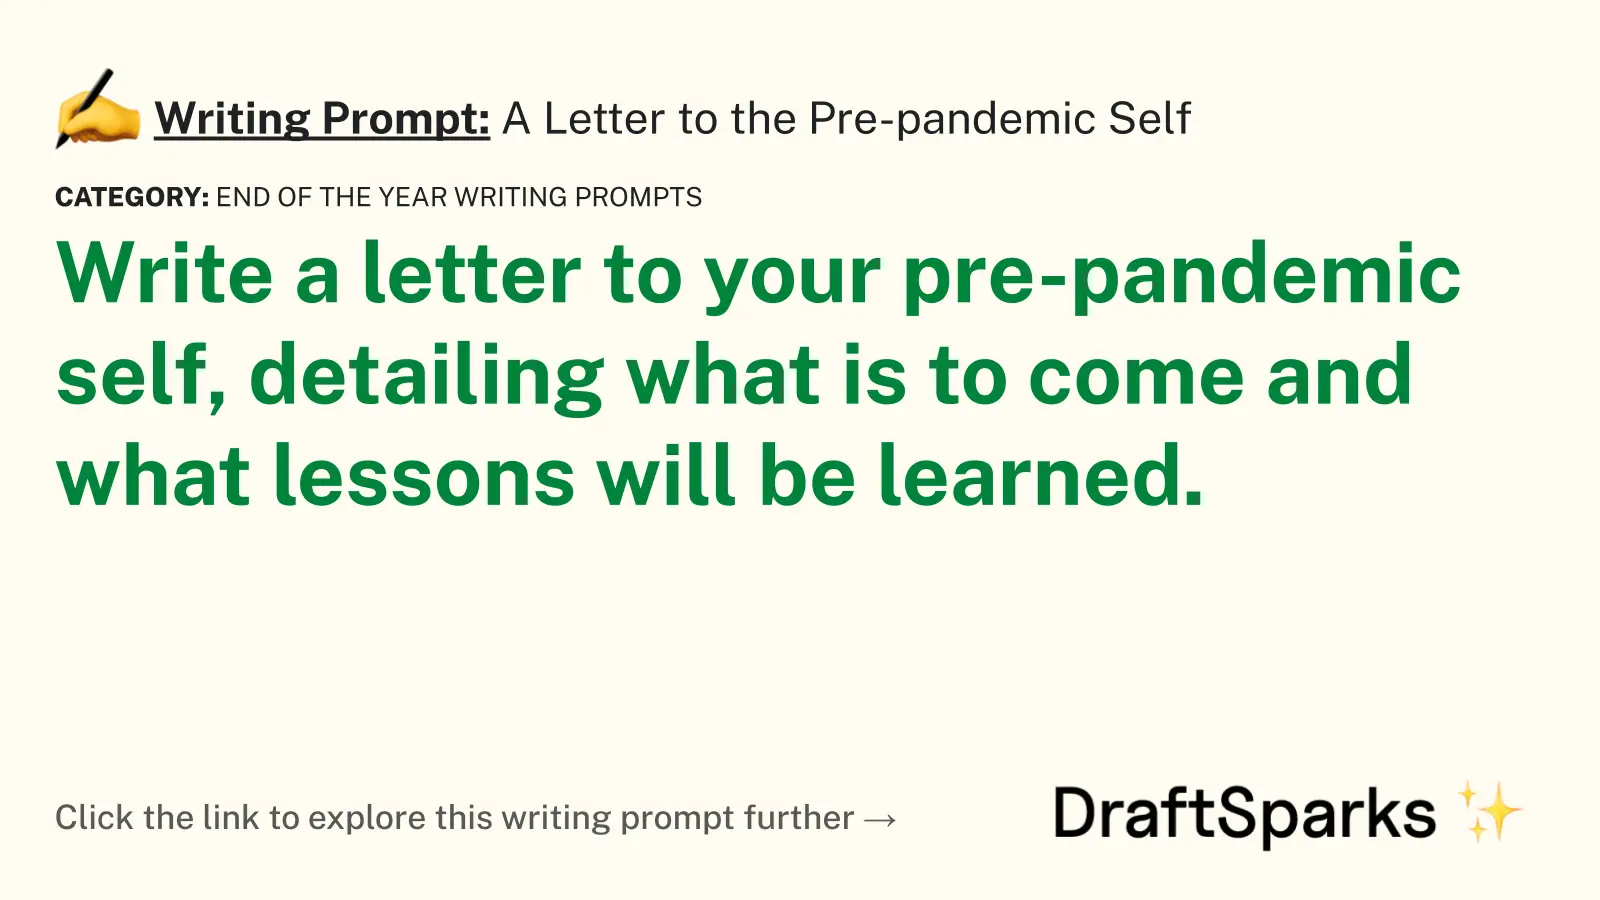 A Letter to the Pre-pandemic Self